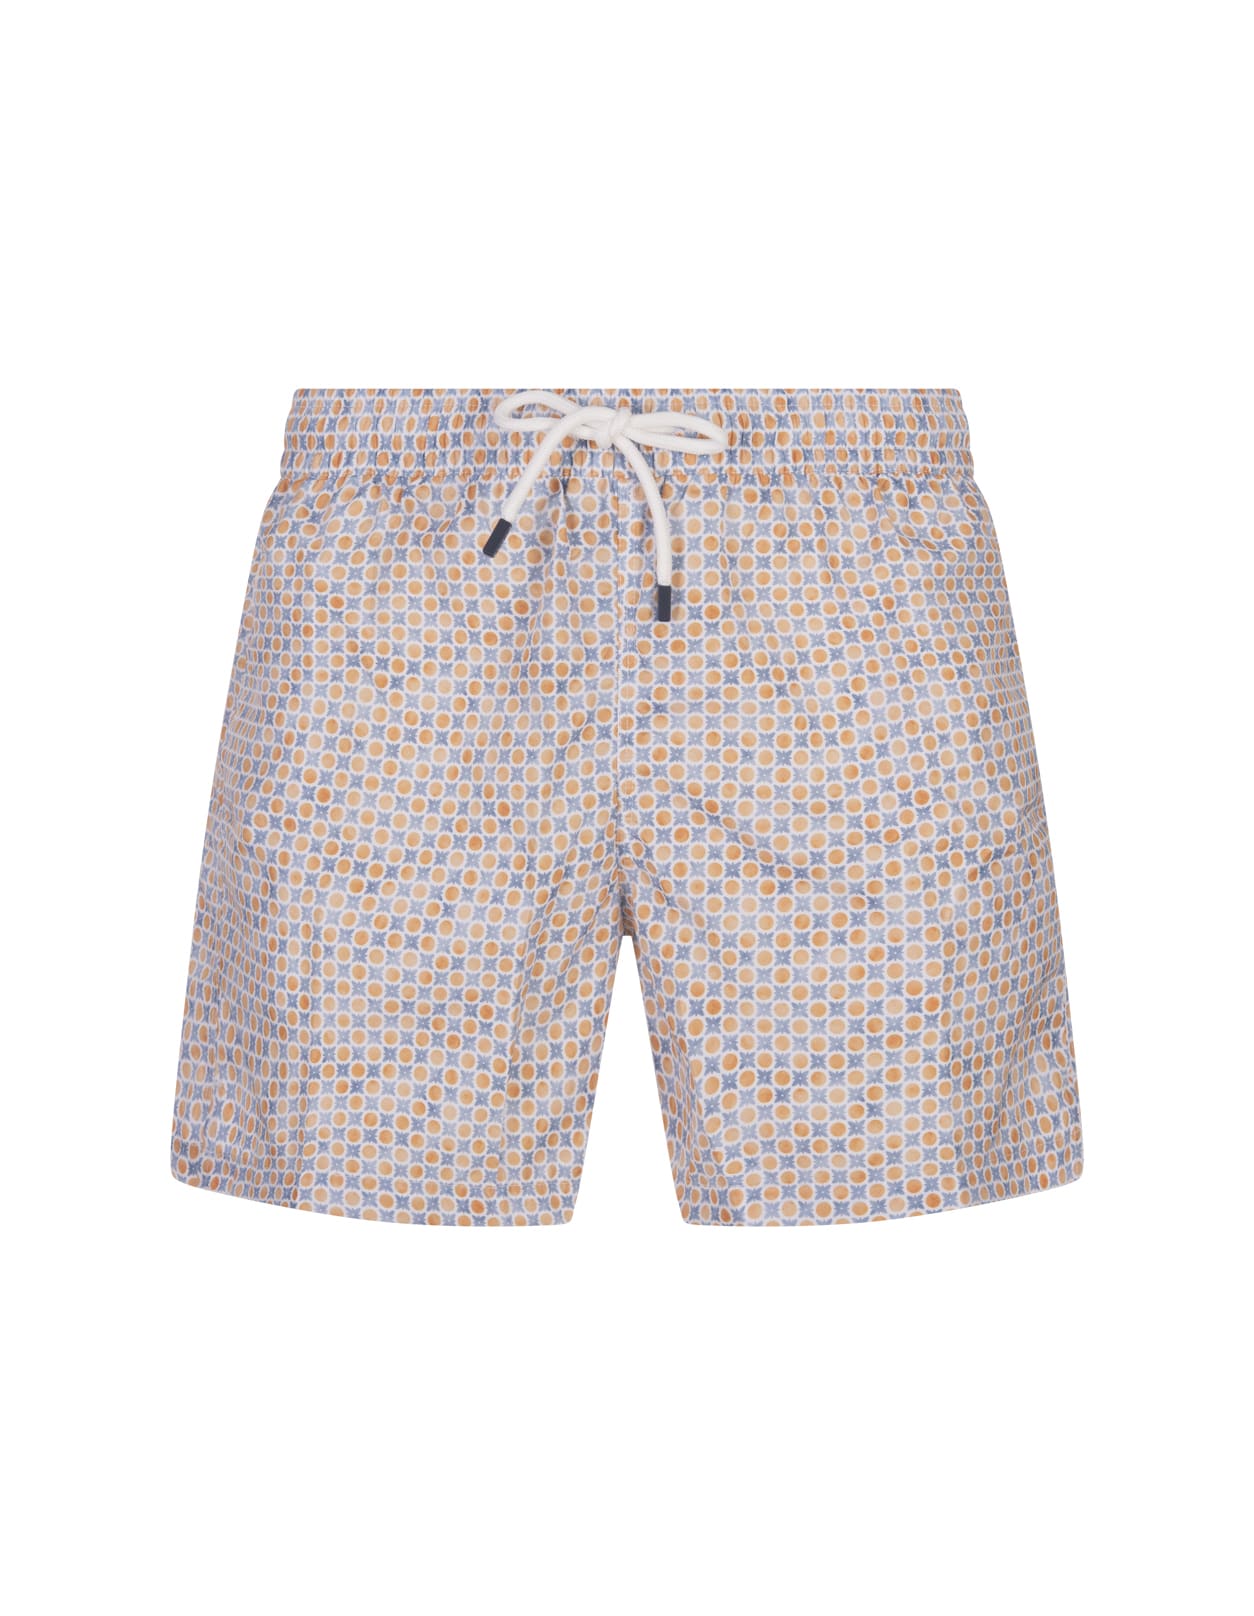 Shop Fedeli Swim Shorts With Micro Pattern Of Polka Dots And Flowers In Orange